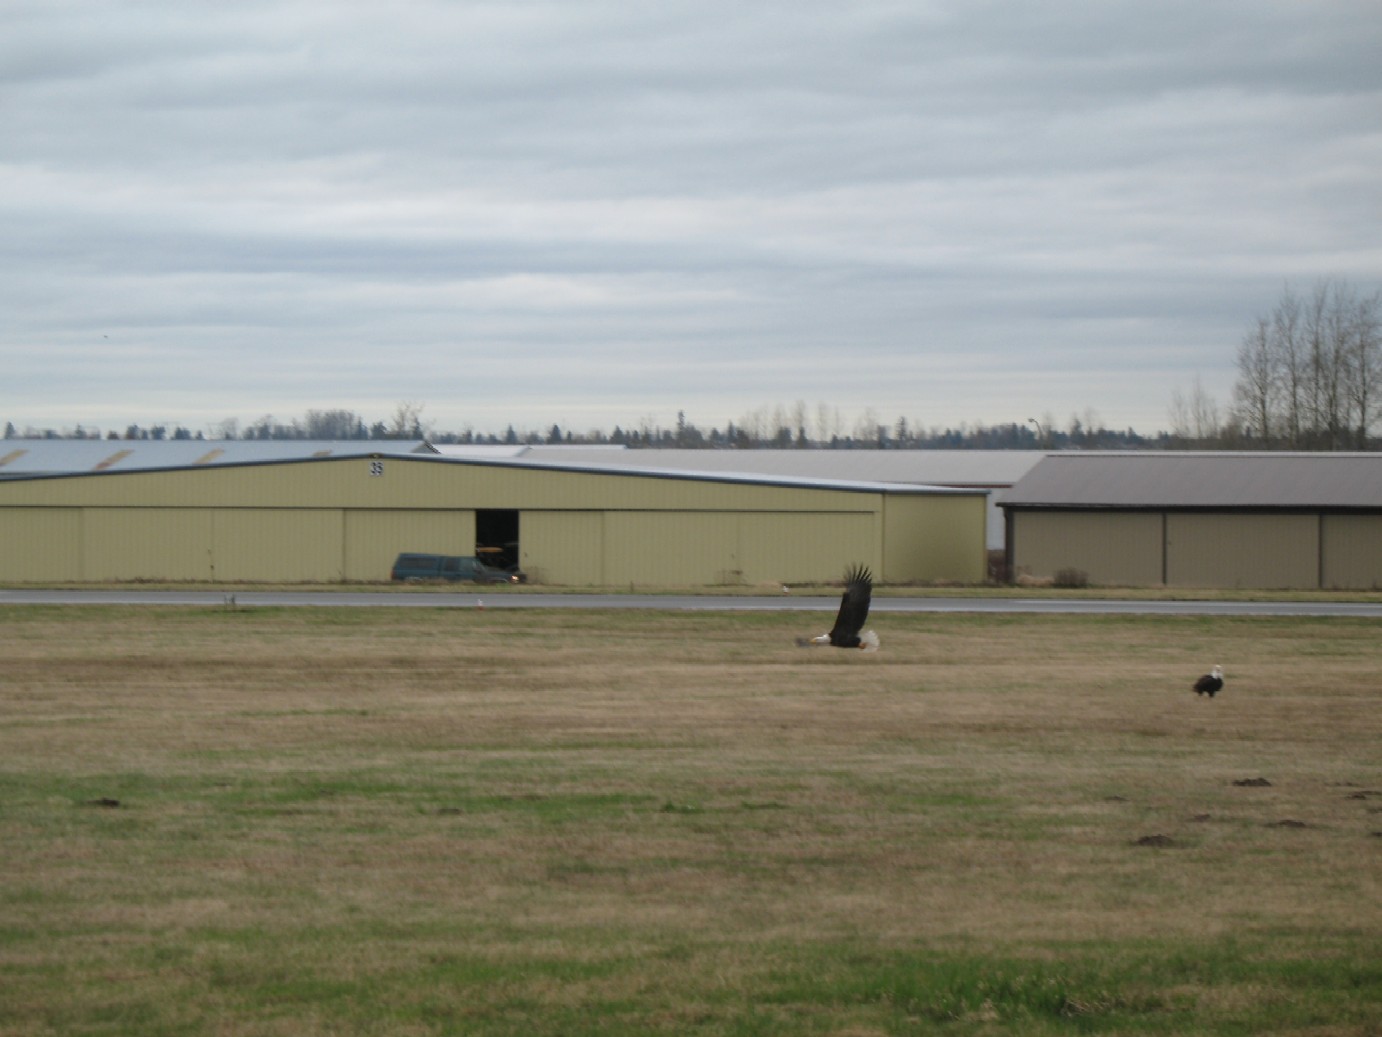 Eagles soar at Langley Airport just off the Langley Flying School ramp.